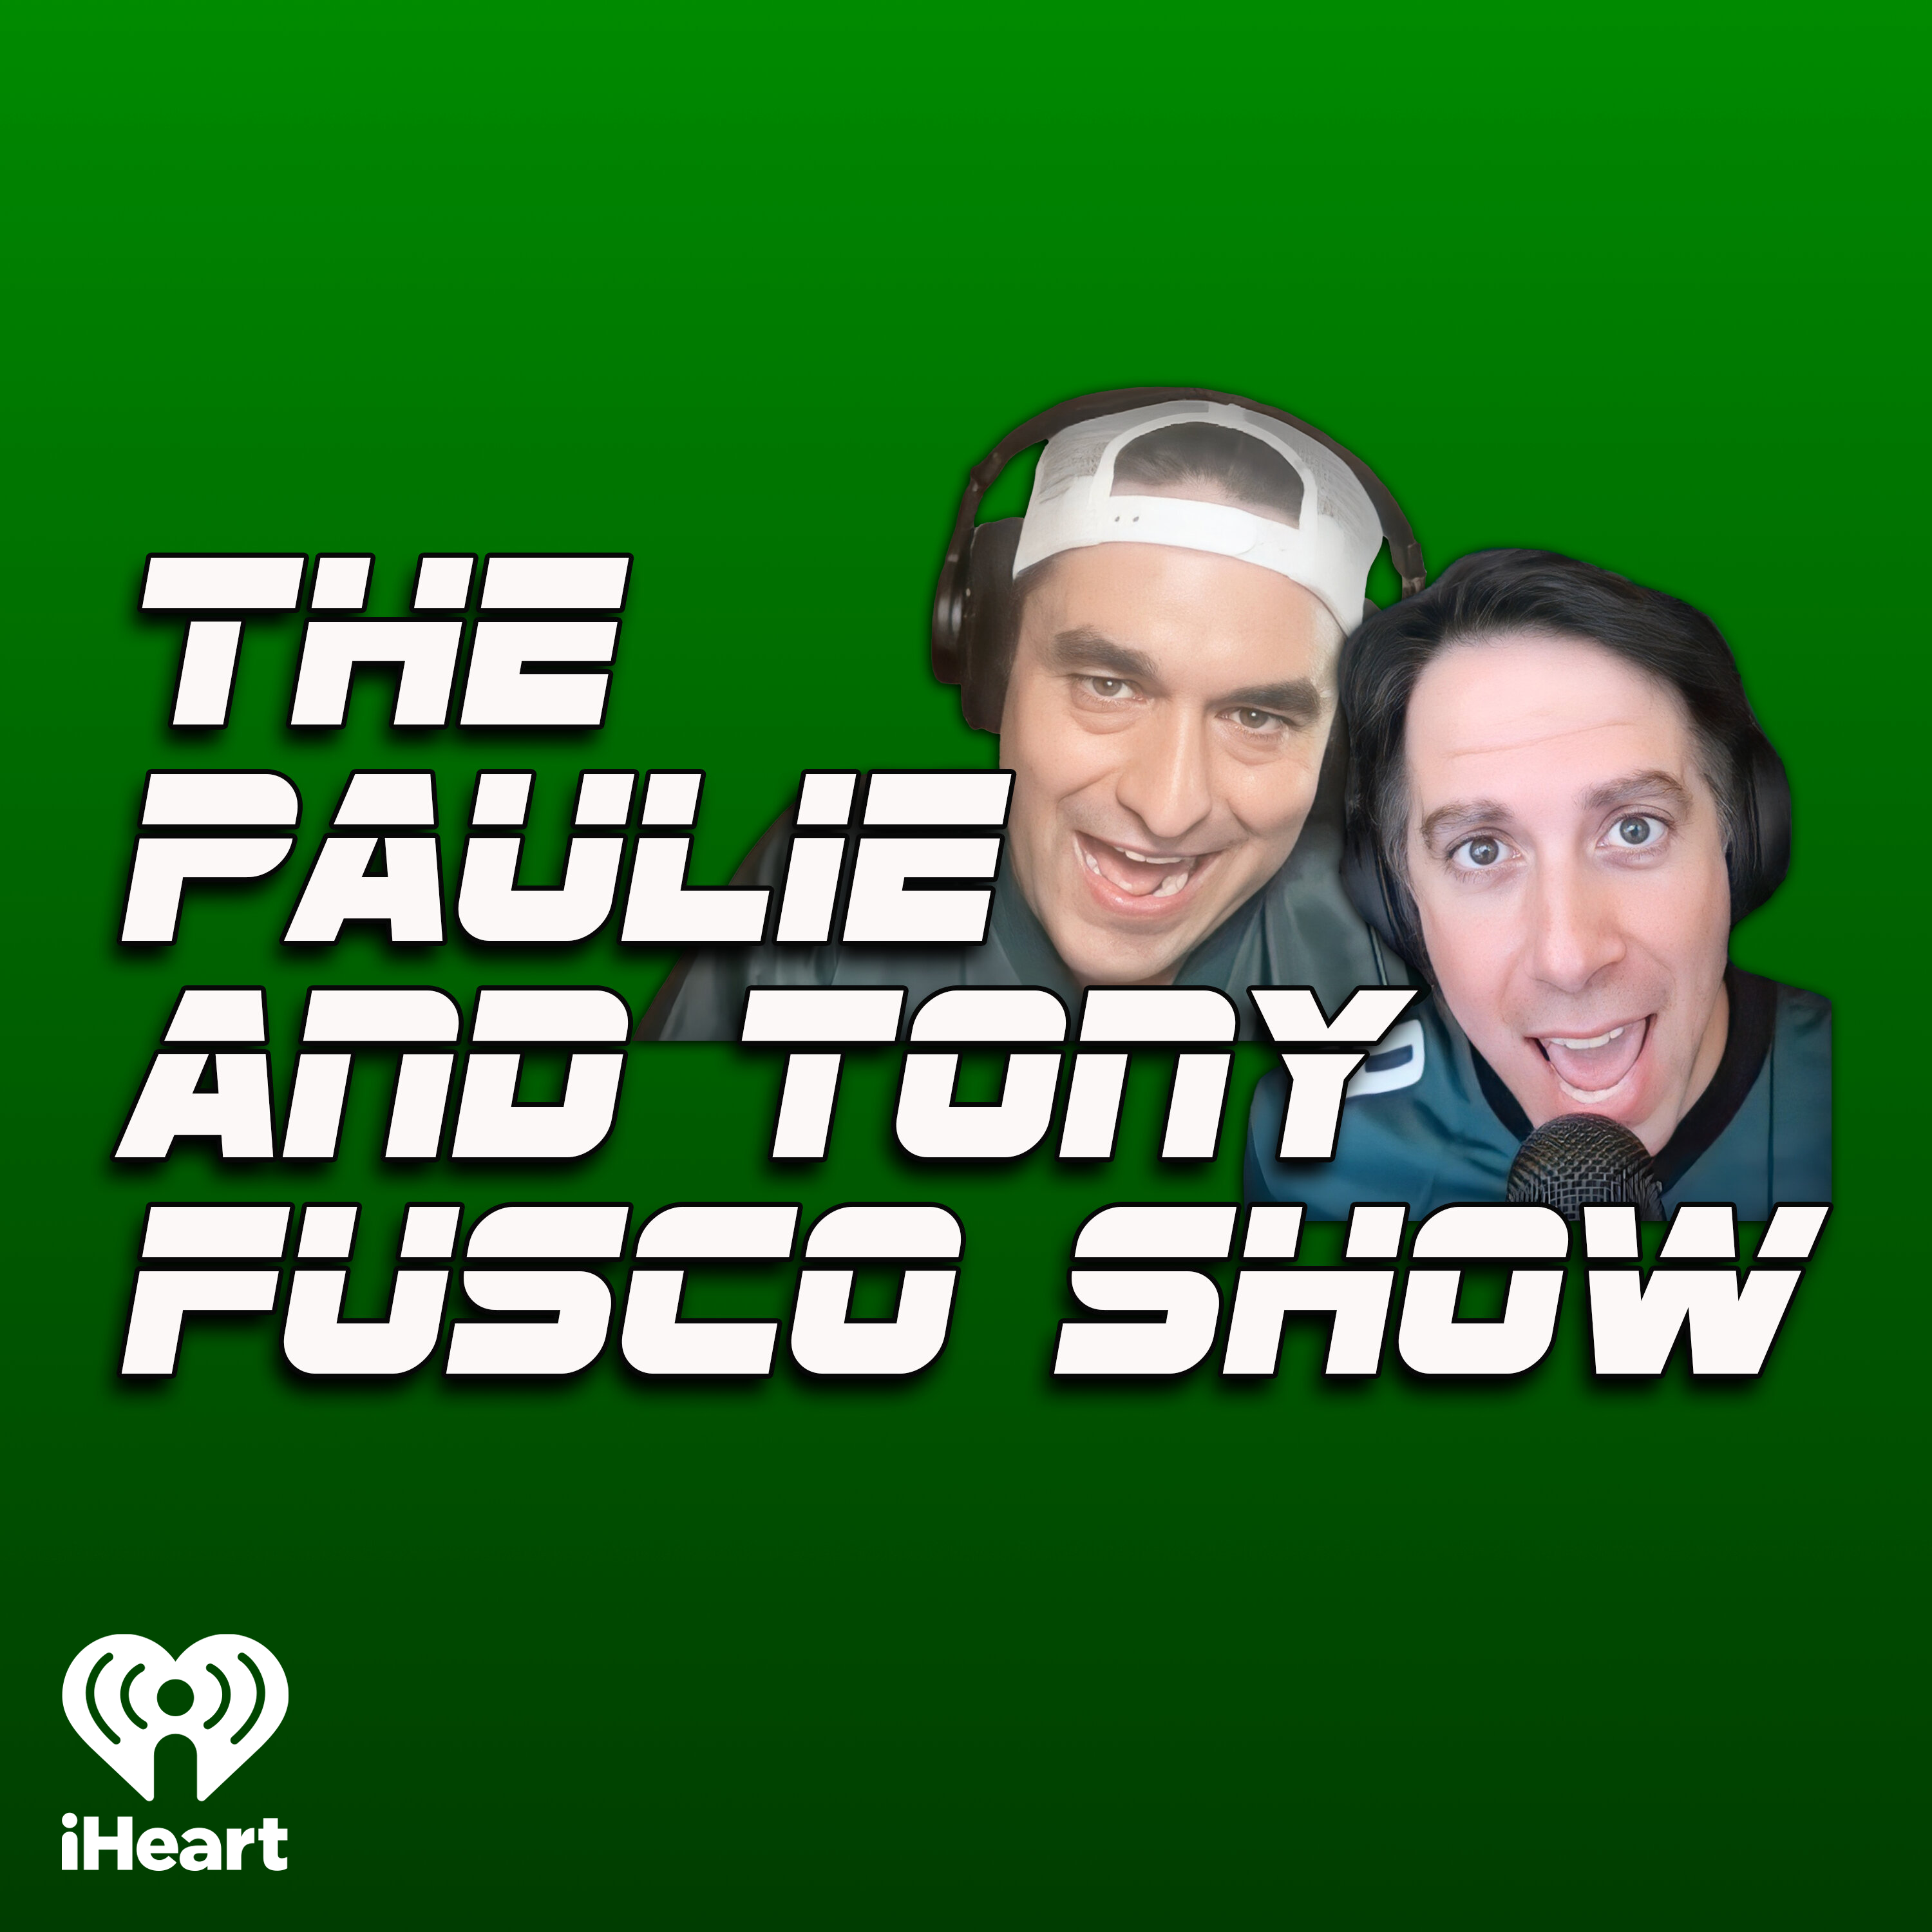 The Paulie & Tony Fusco Show: Marcellus Wiley GOES DOWN, Aaron Rodgers CONSPIRACY, Mel Tucker UNFAIRLY ATTACKED??